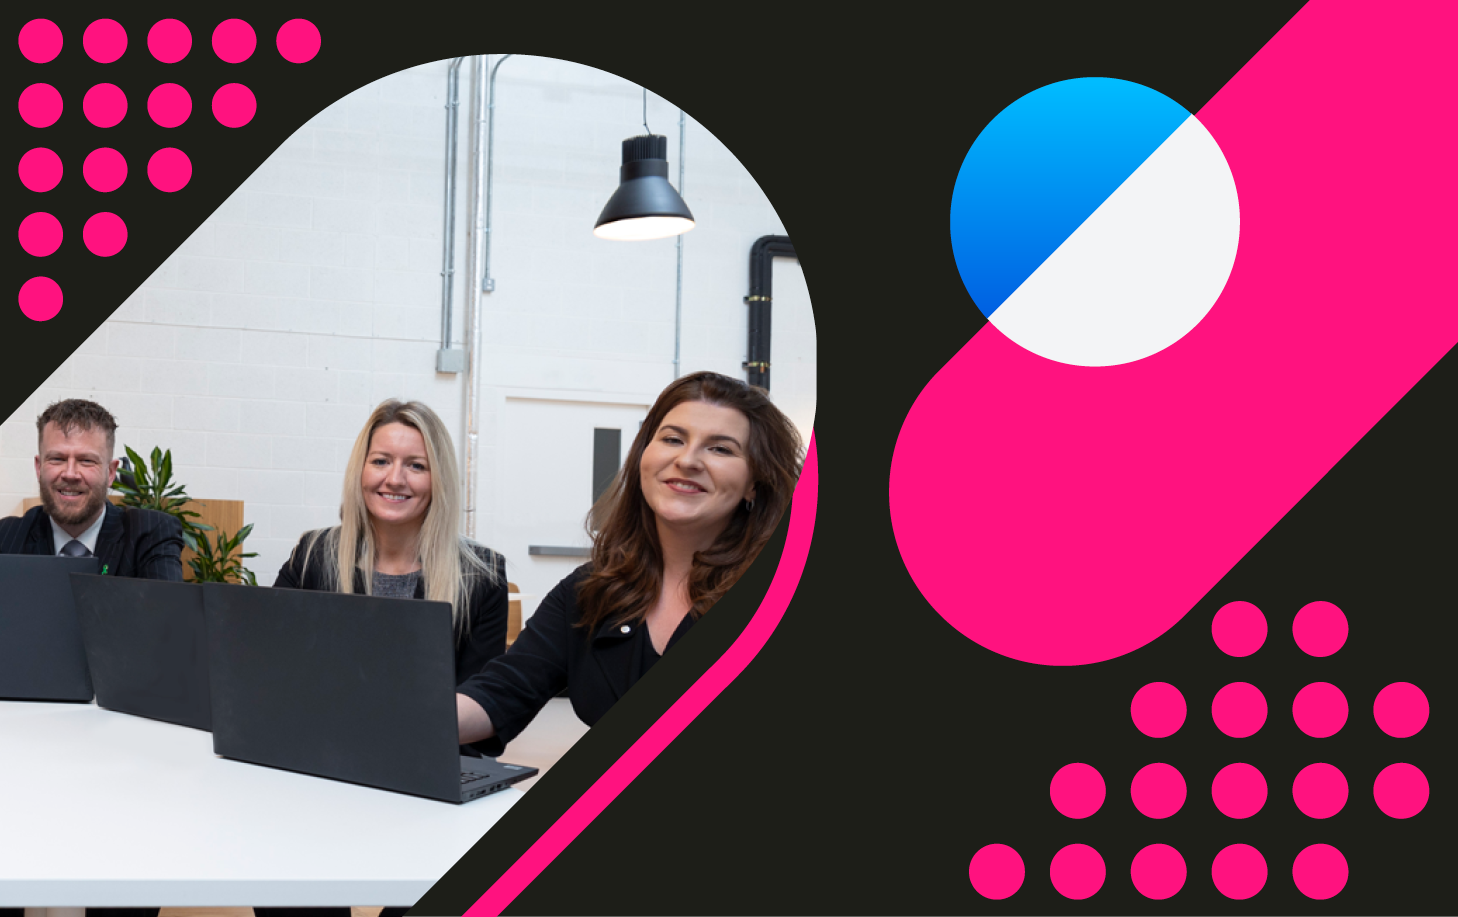 InnoScot Health 'expertise' carousel image, featuring some of our members of staff and our hot pink brand colour.